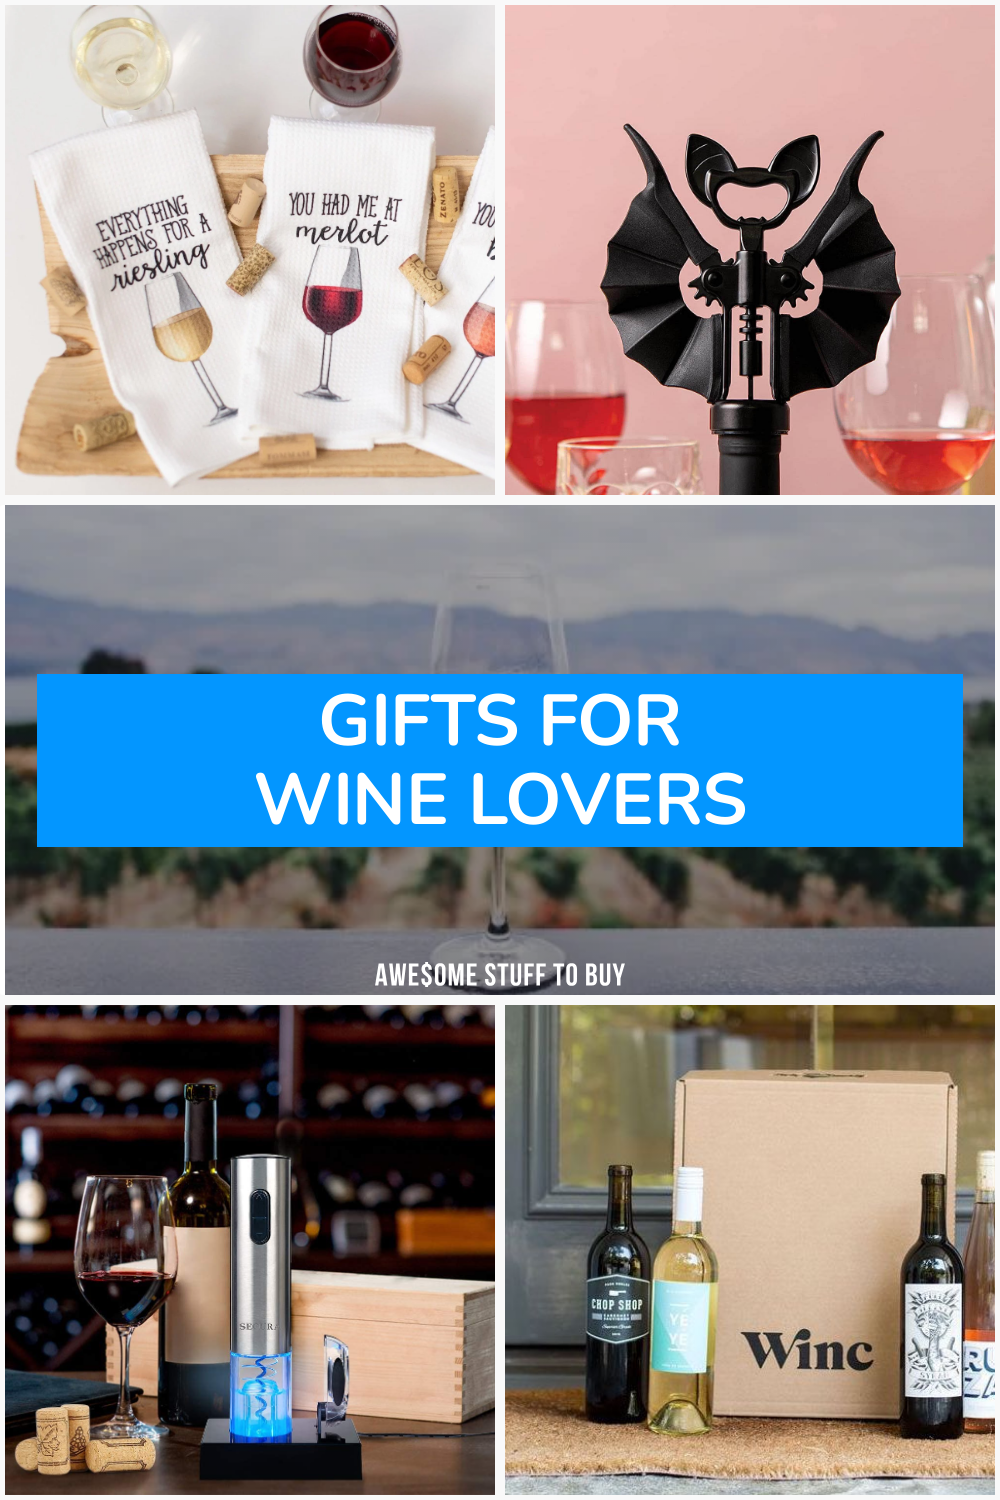 Gifts for Wine Lovers // Awesome Stuff to Buy